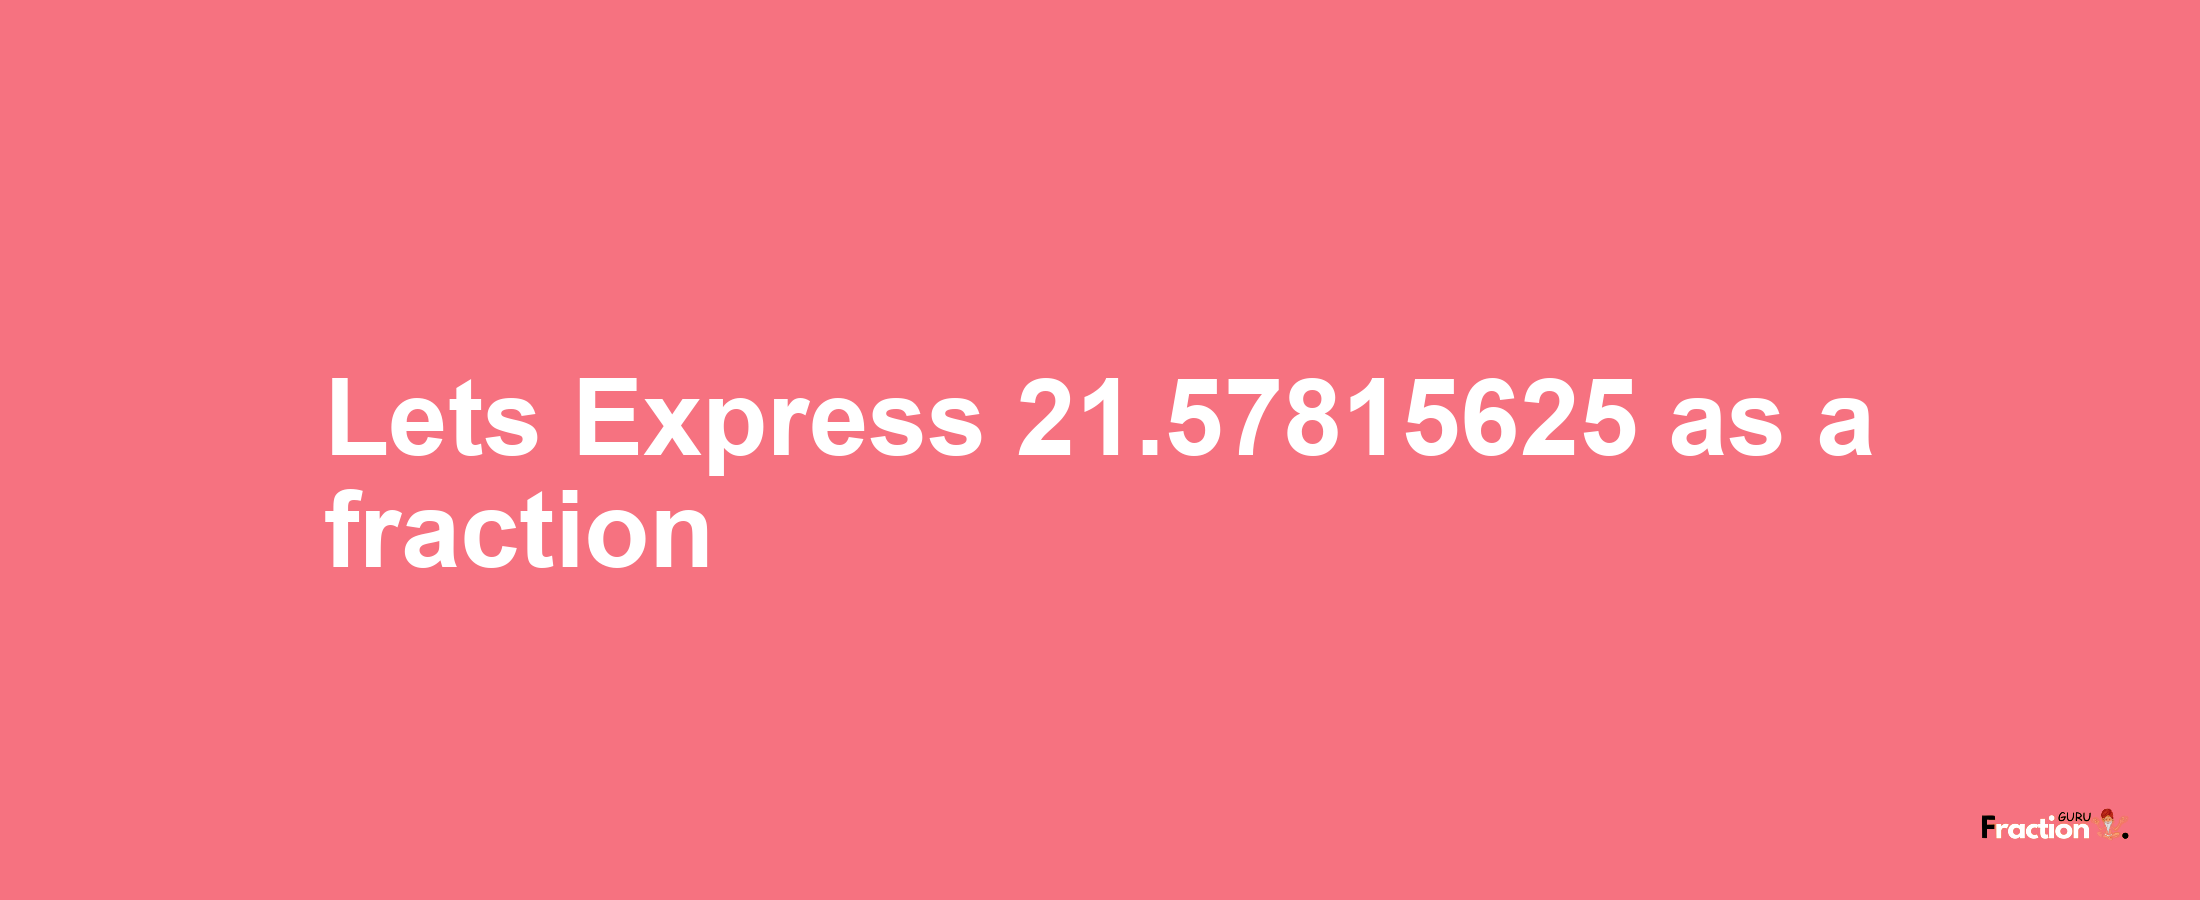 Lets Express 21.57815625 as afraction